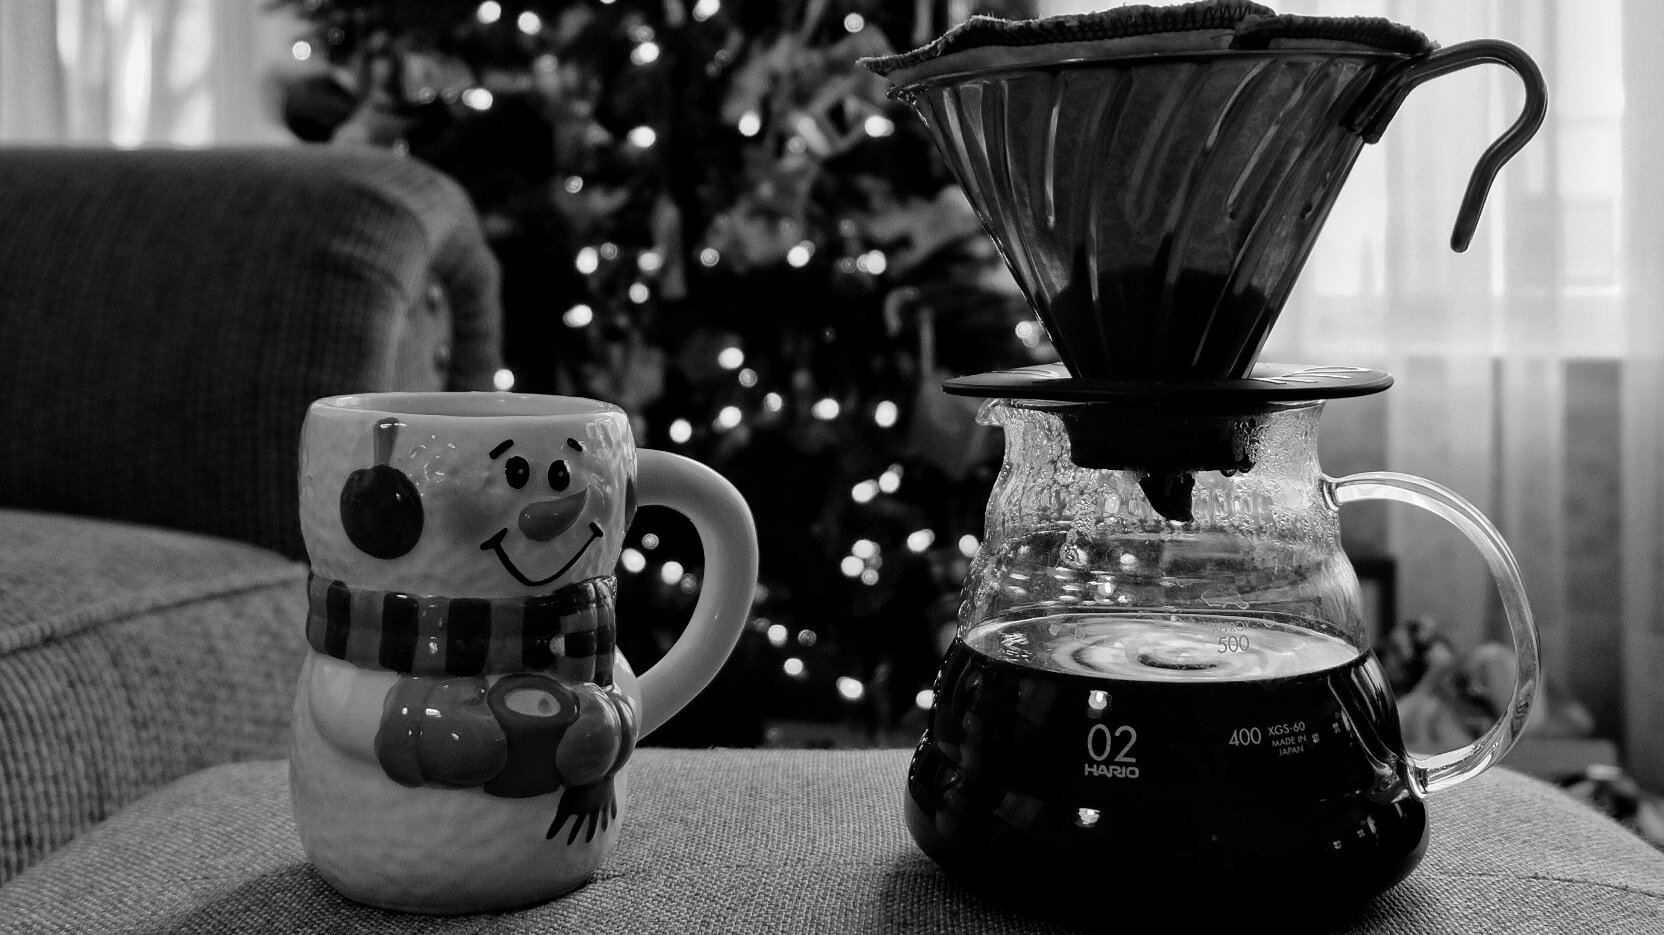 A snowman-themed mug and Hario V60 brewing device in close up in front of a Christmas tree